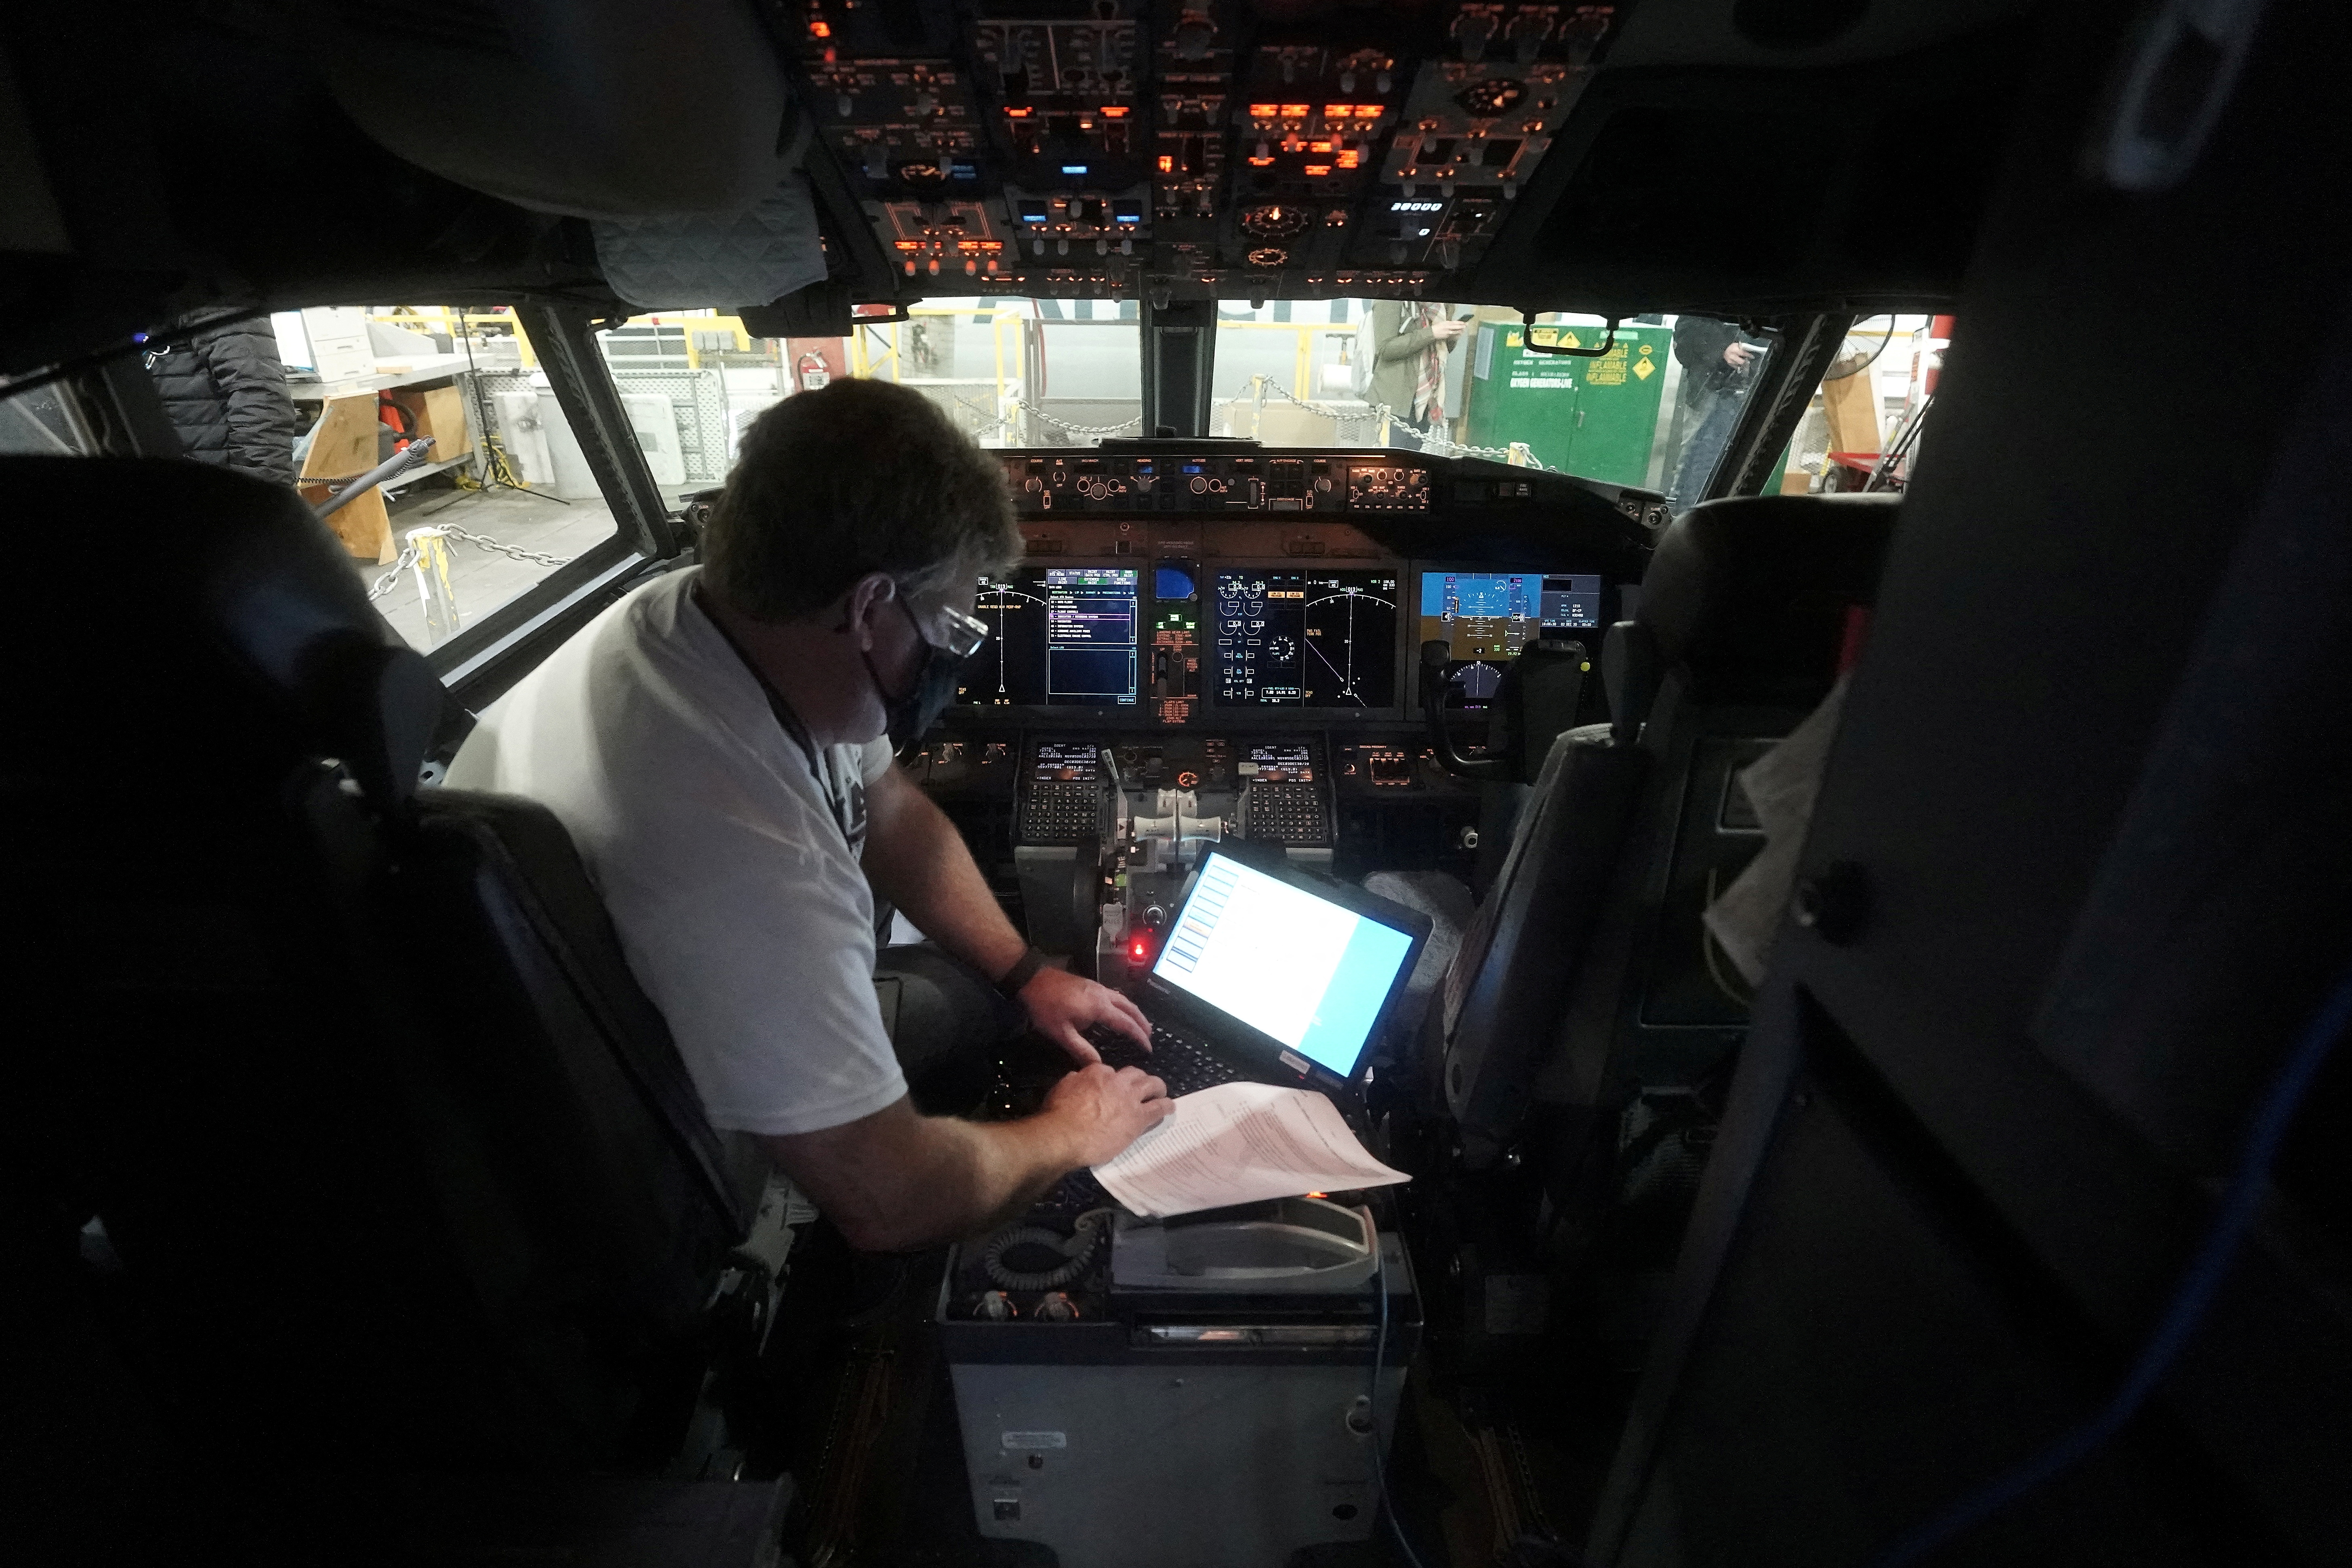 A worker loads new software into the Boeing 737 Max airplane in a maintenance hangar in Tulsa